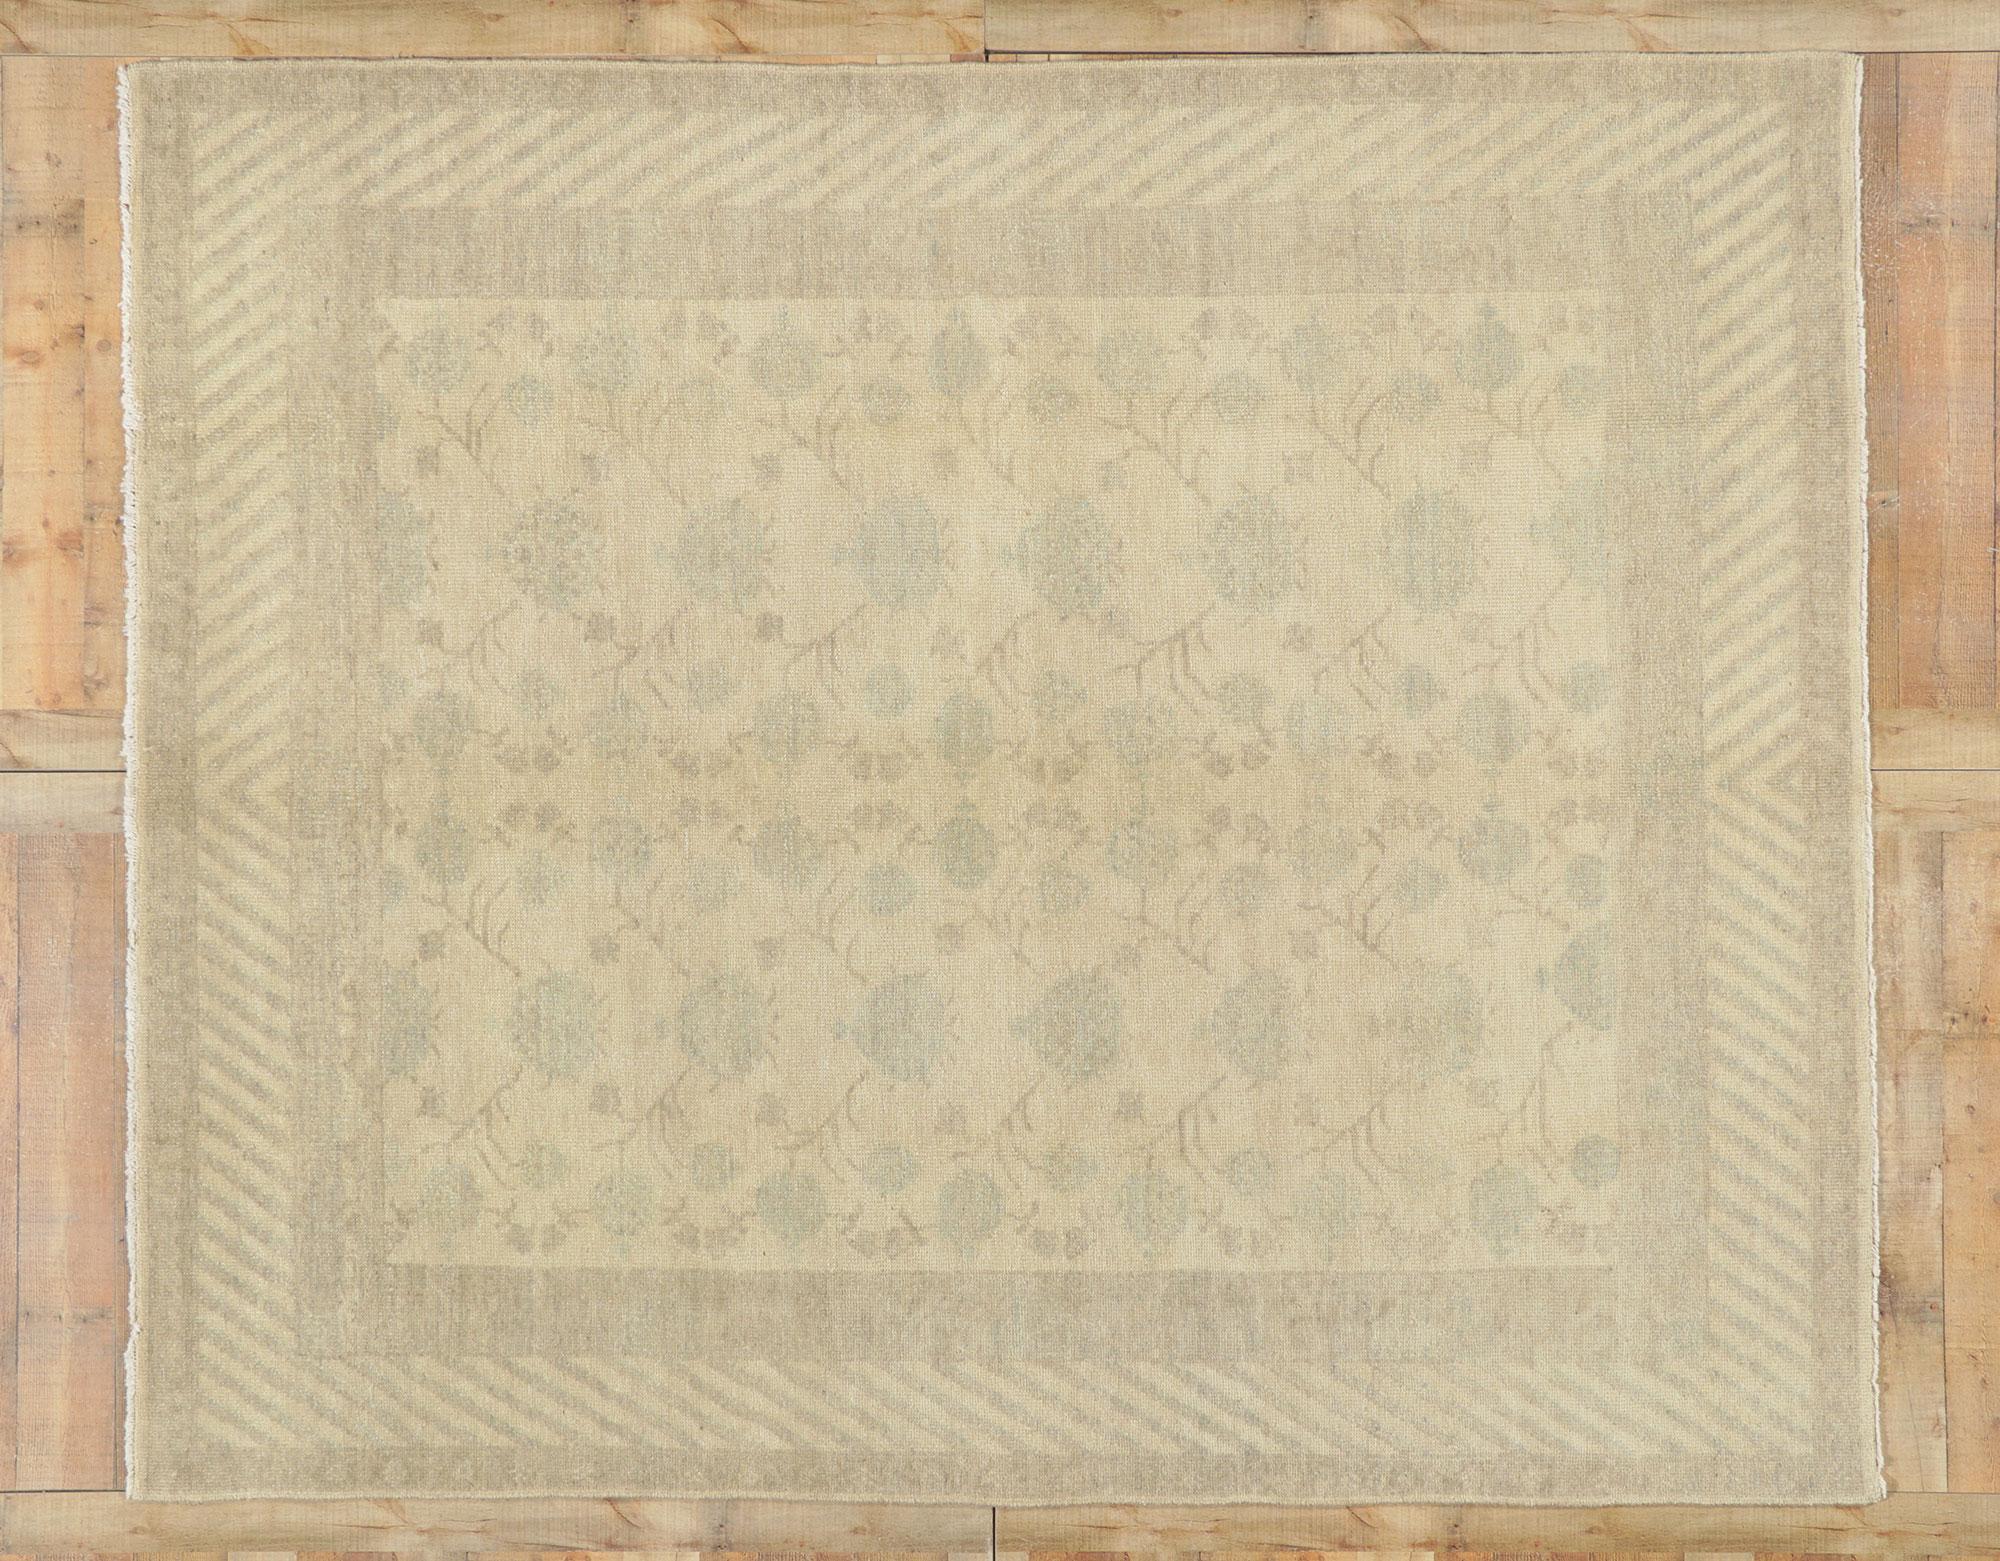 New Transitional Khotan Rug with Soft Earth-Tone Colors For Sale 1